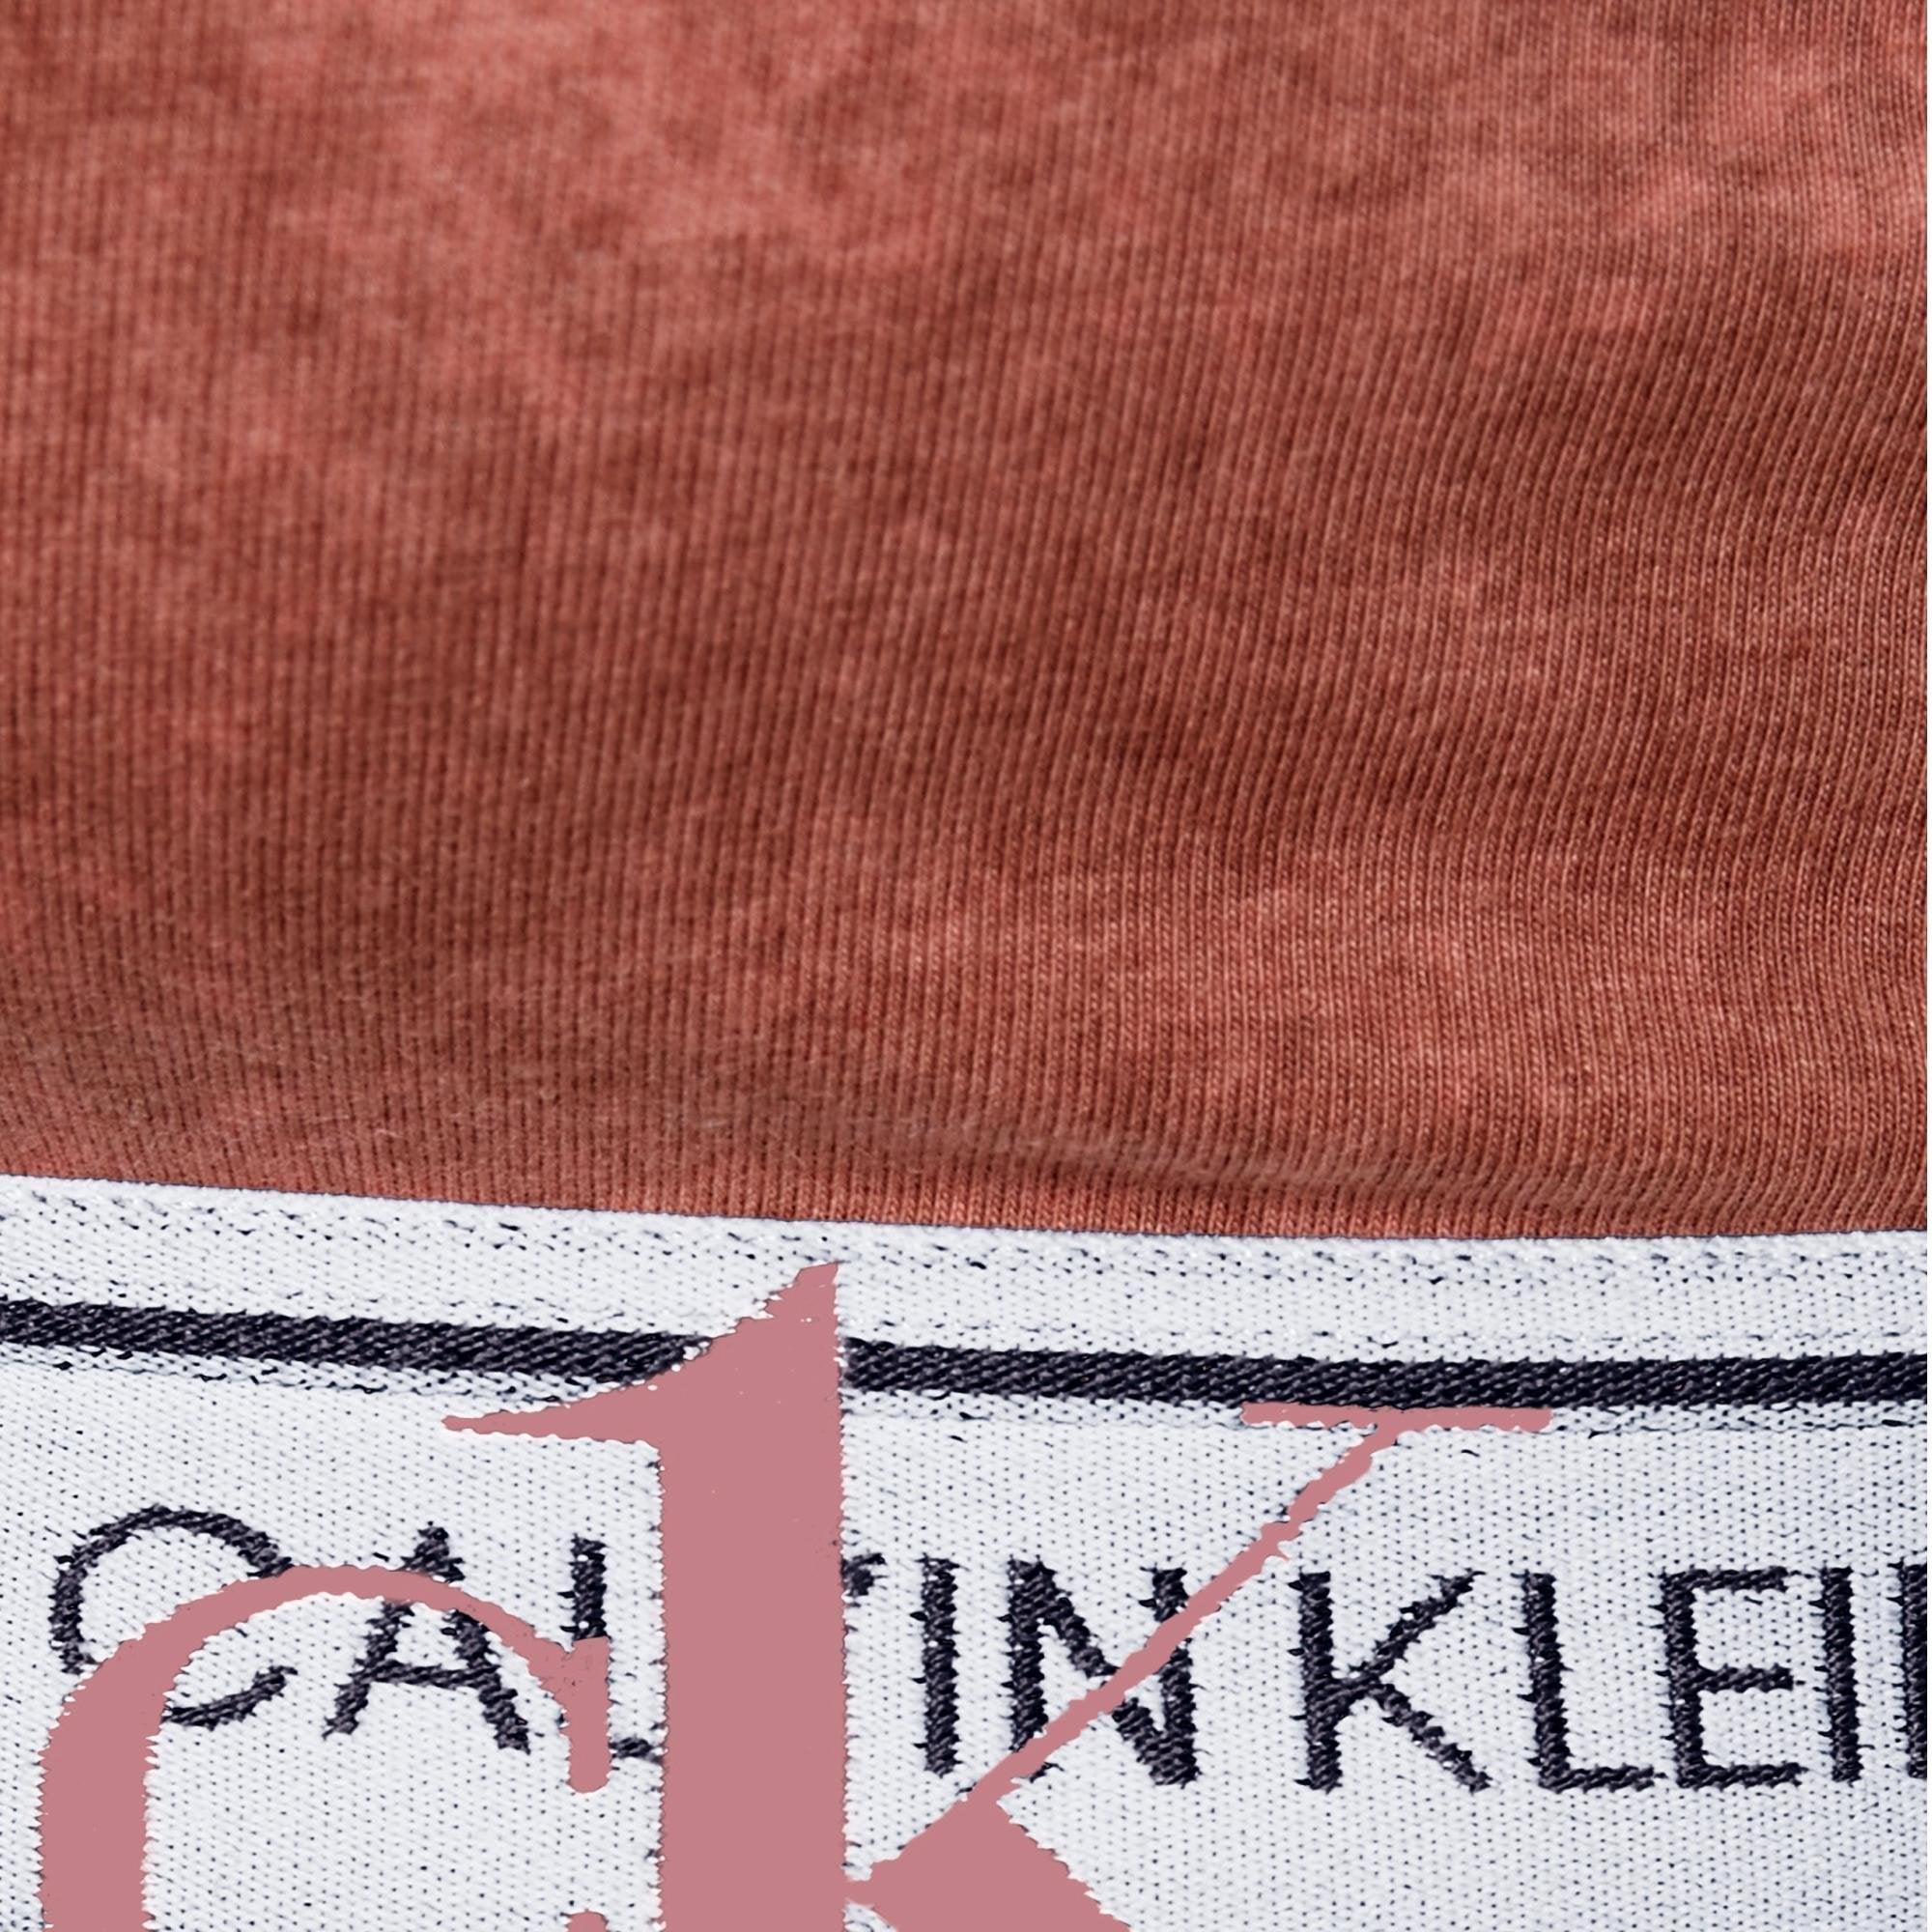 Calvin Klein Ck One Unlined Triangle Bralette - Faded Red Grape - Utility  Bear Apparel & Accessories